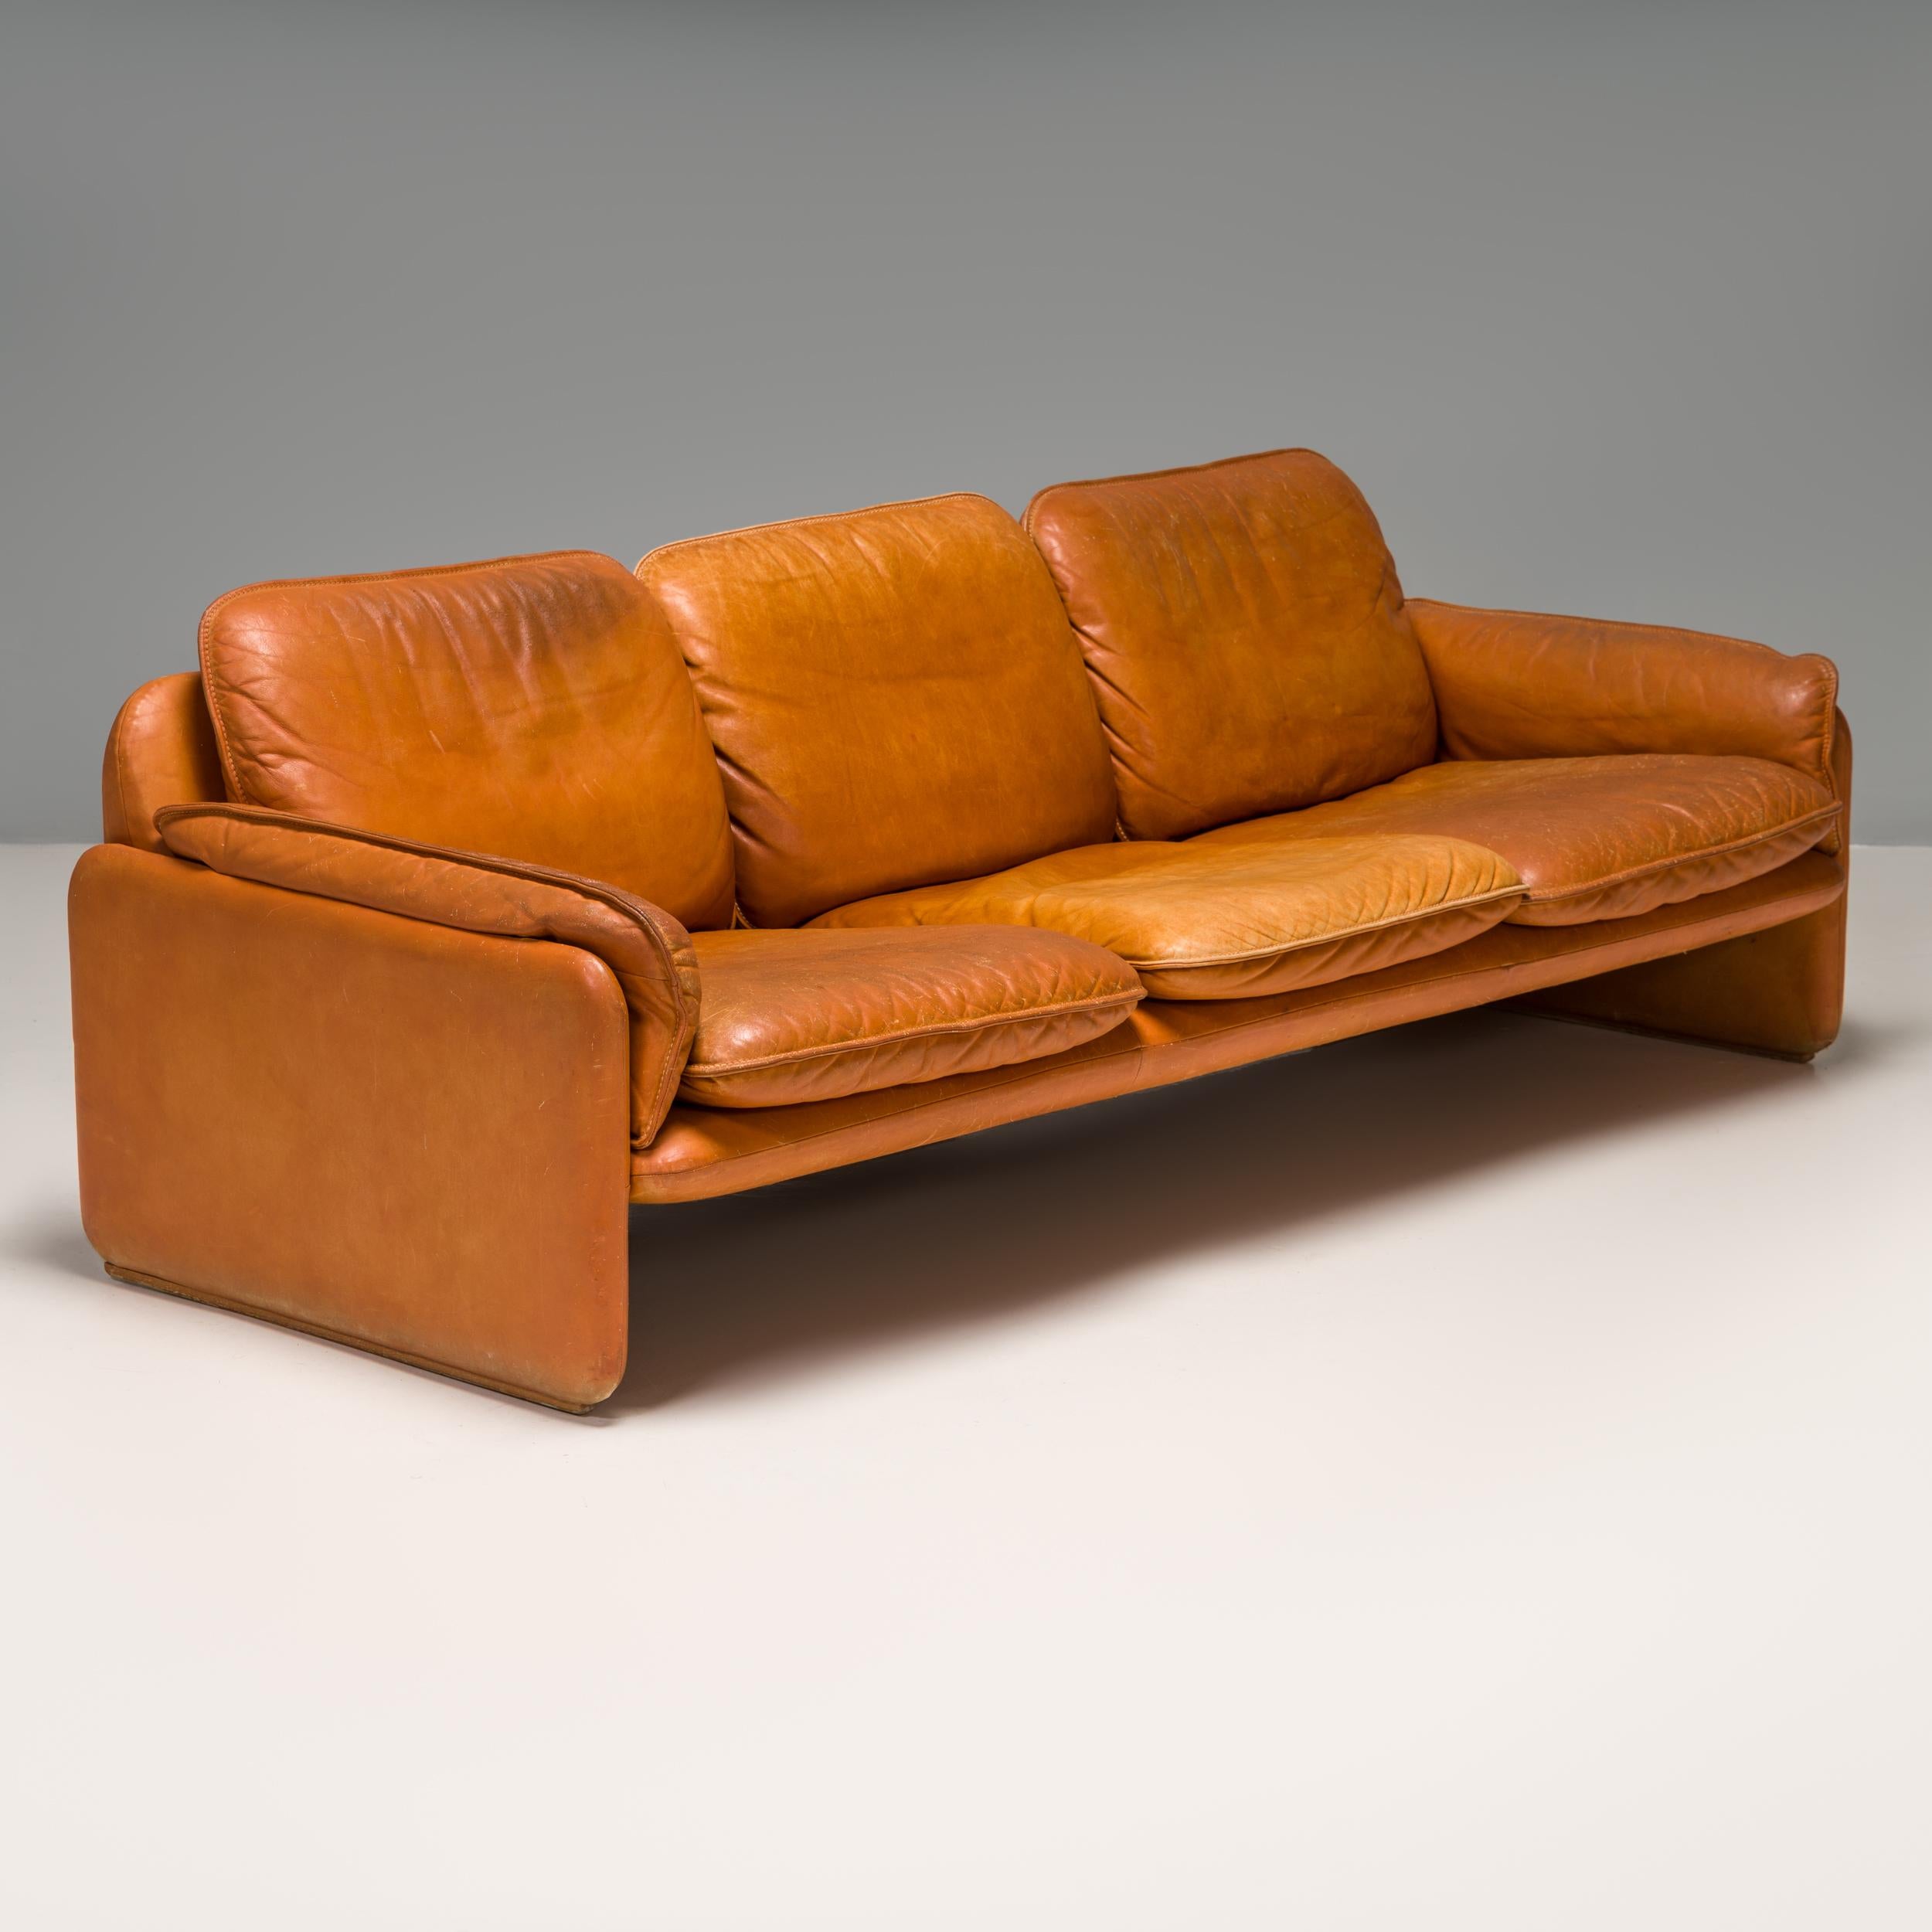 An iconic mid century design, the De Sede DS-61 is no longer in production making it a collectible piece from the furniture manufacturer.

Fully upholstered in soft cognac leather, this three seat sofa features a slimline frame with curved edges